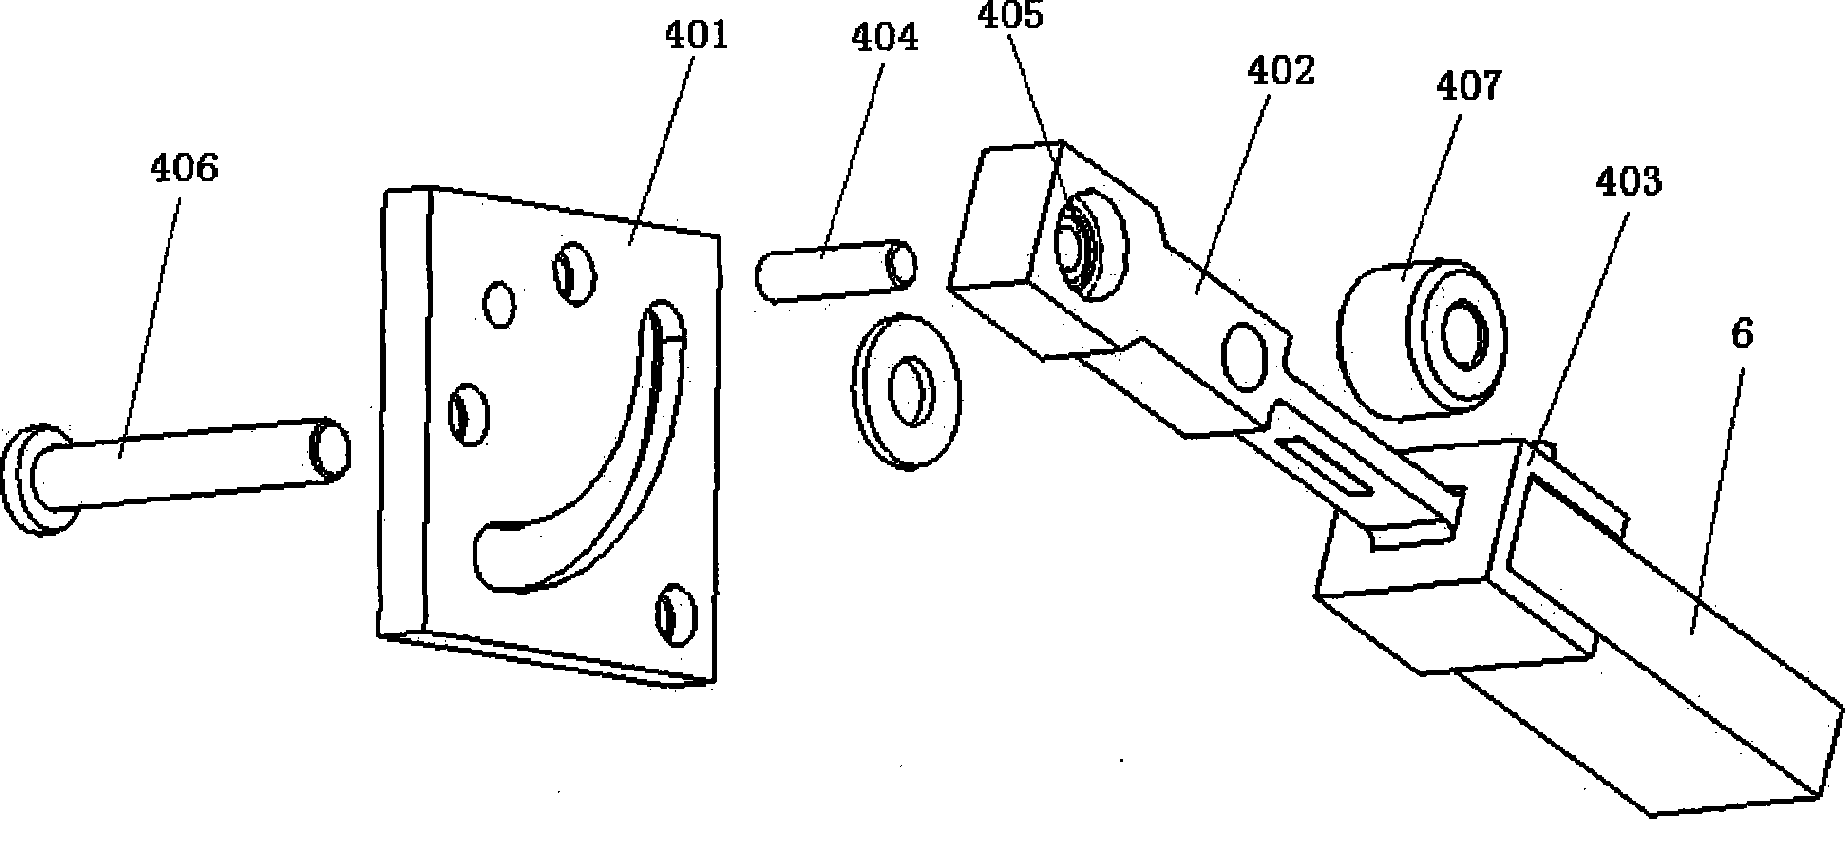 Tester for single-particle intrusion into relative interface